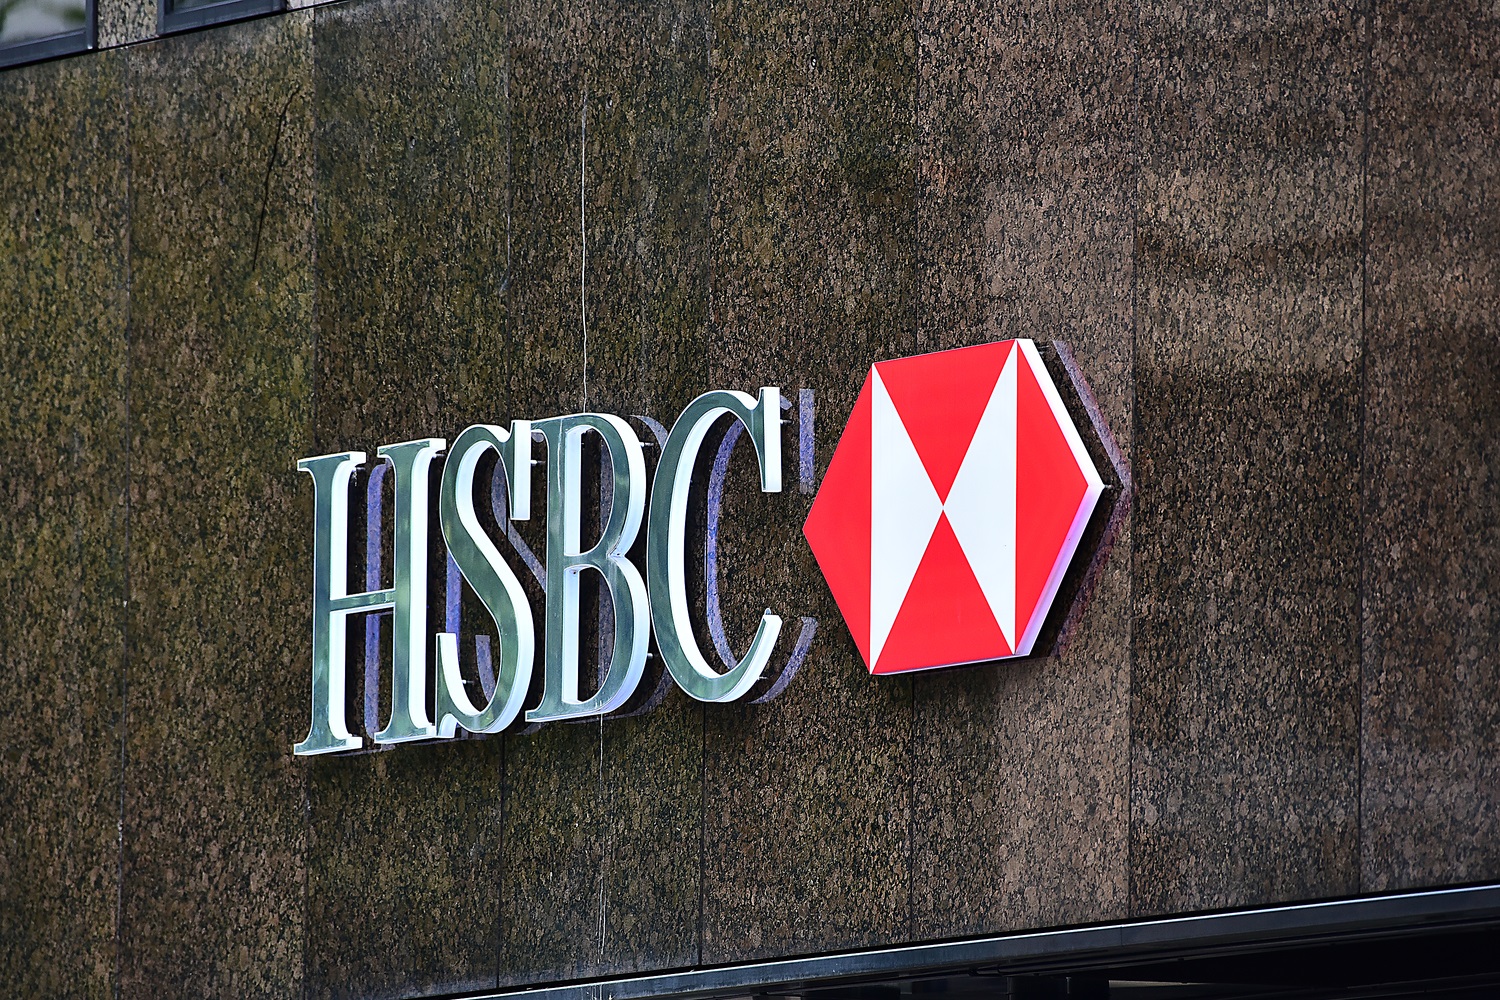 HSBC Says It’s Settled $250 Billion In Trades With Distributed Ledger Tech